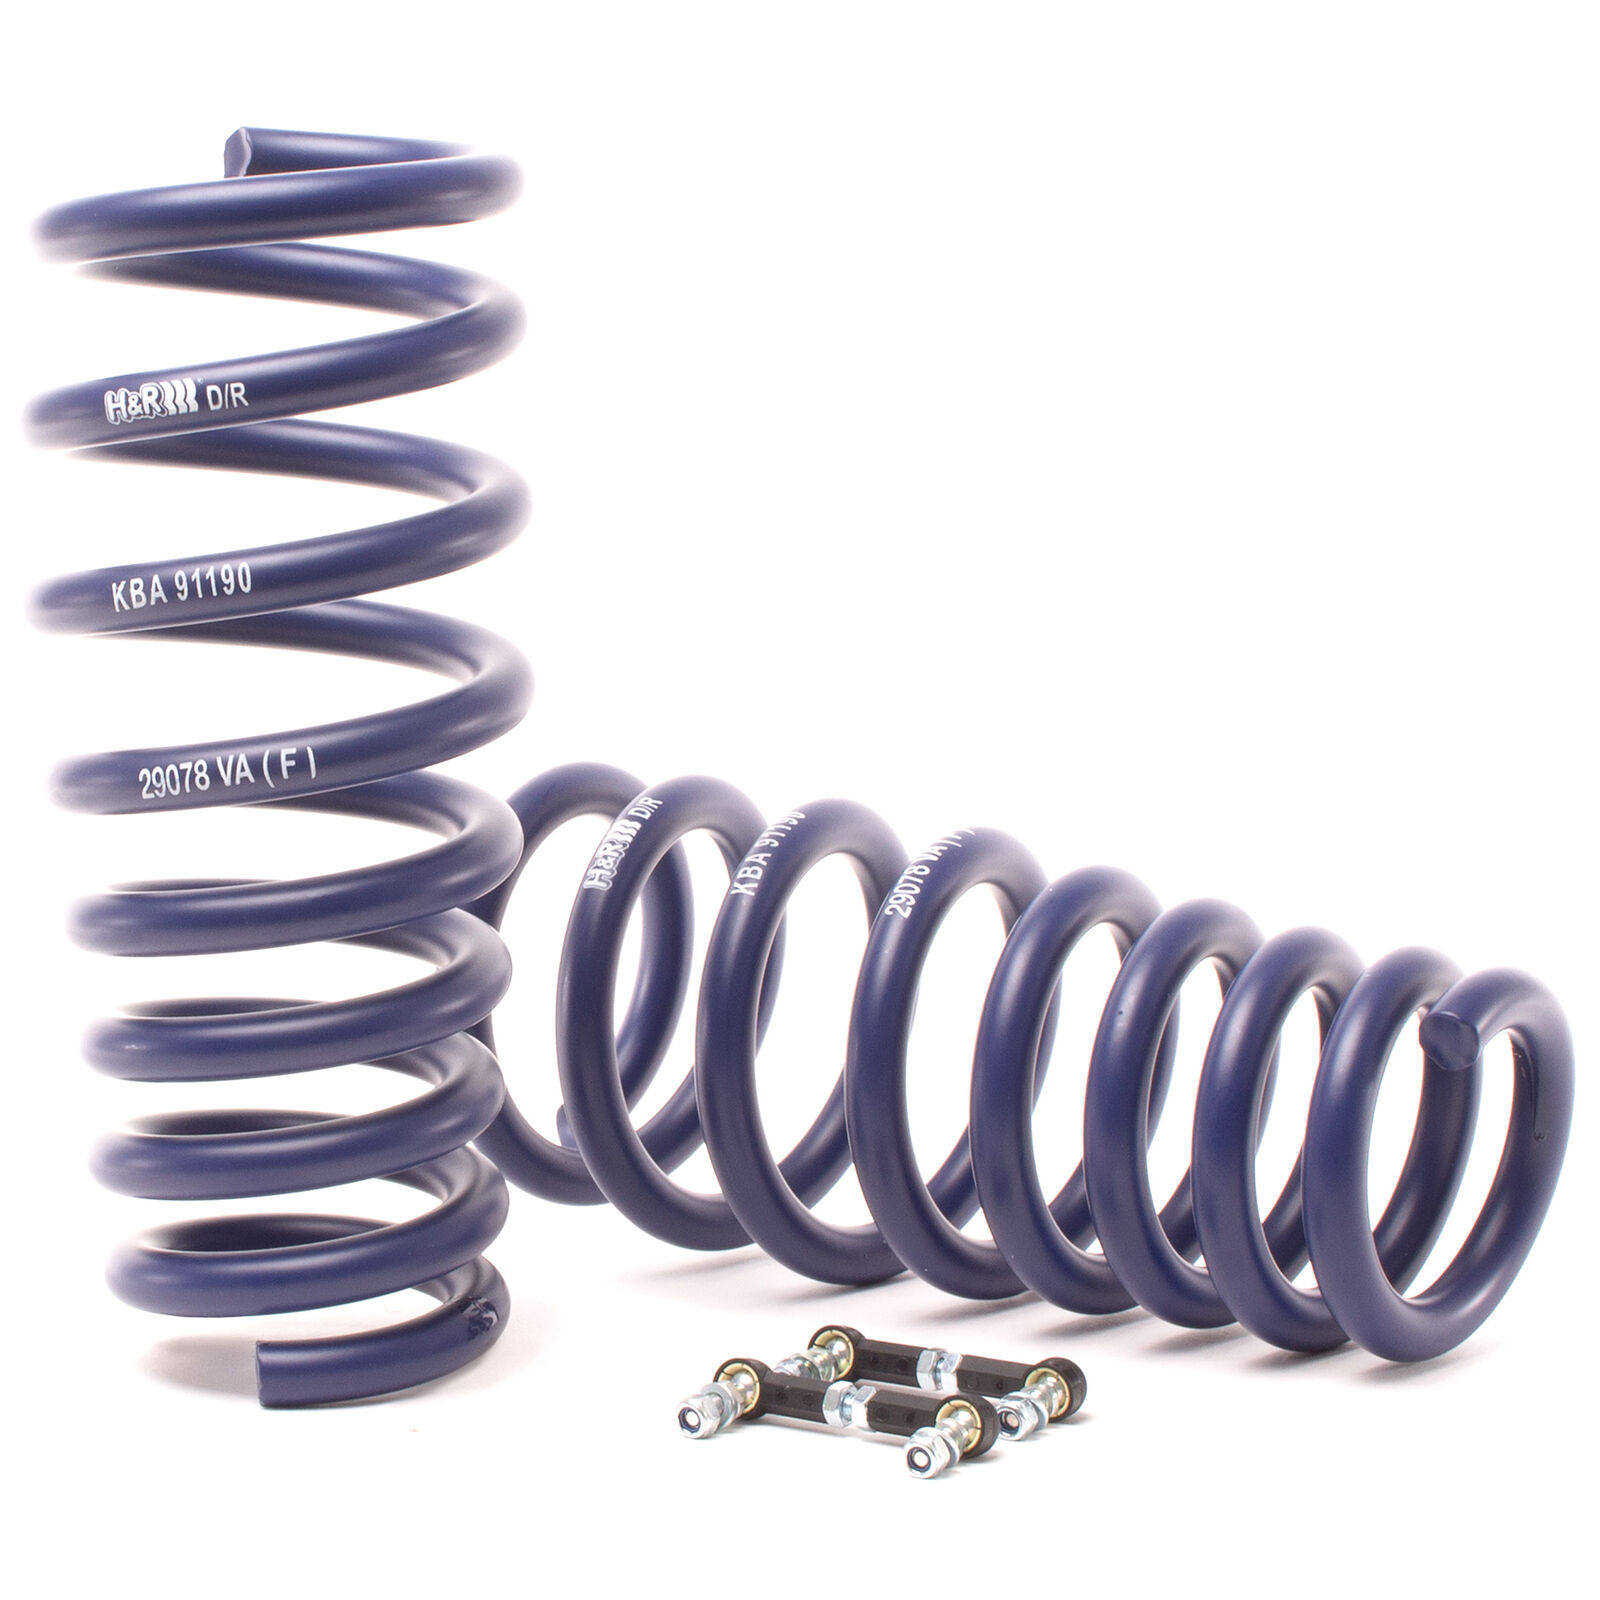 H&R 50435-2 Lowering Sport Springs Kit for 07-13 BMW X5 E70 X5 M / 07-14 X6 X70